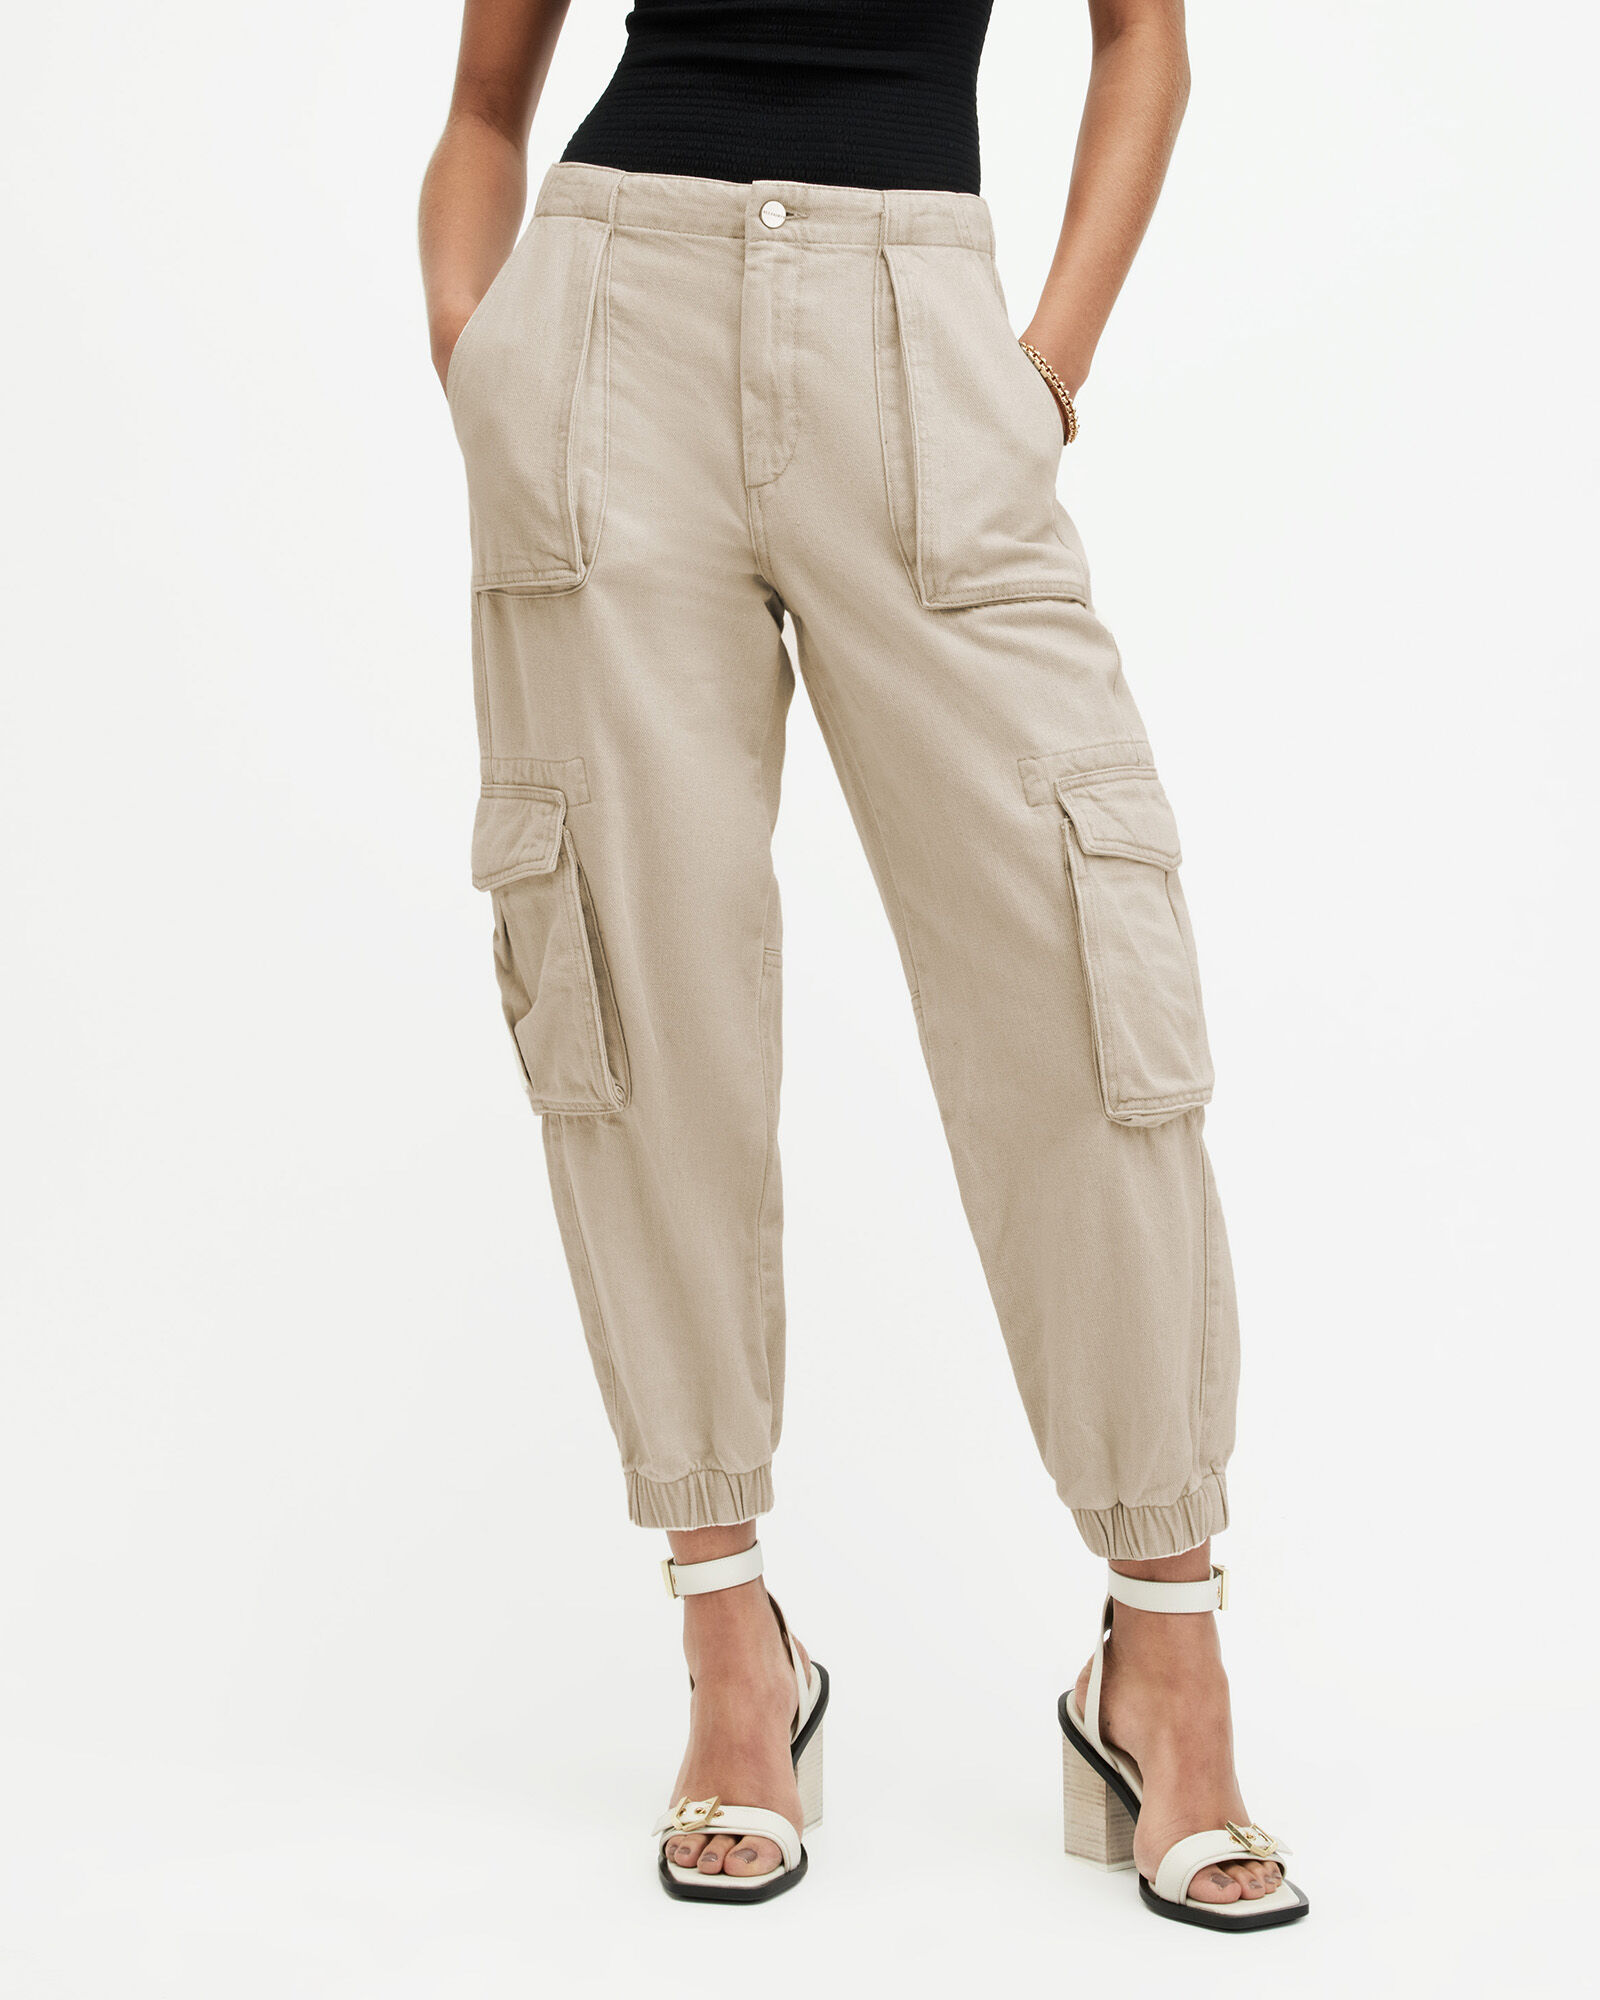 M&Co Sage Green Cargo Trousers | M&Co